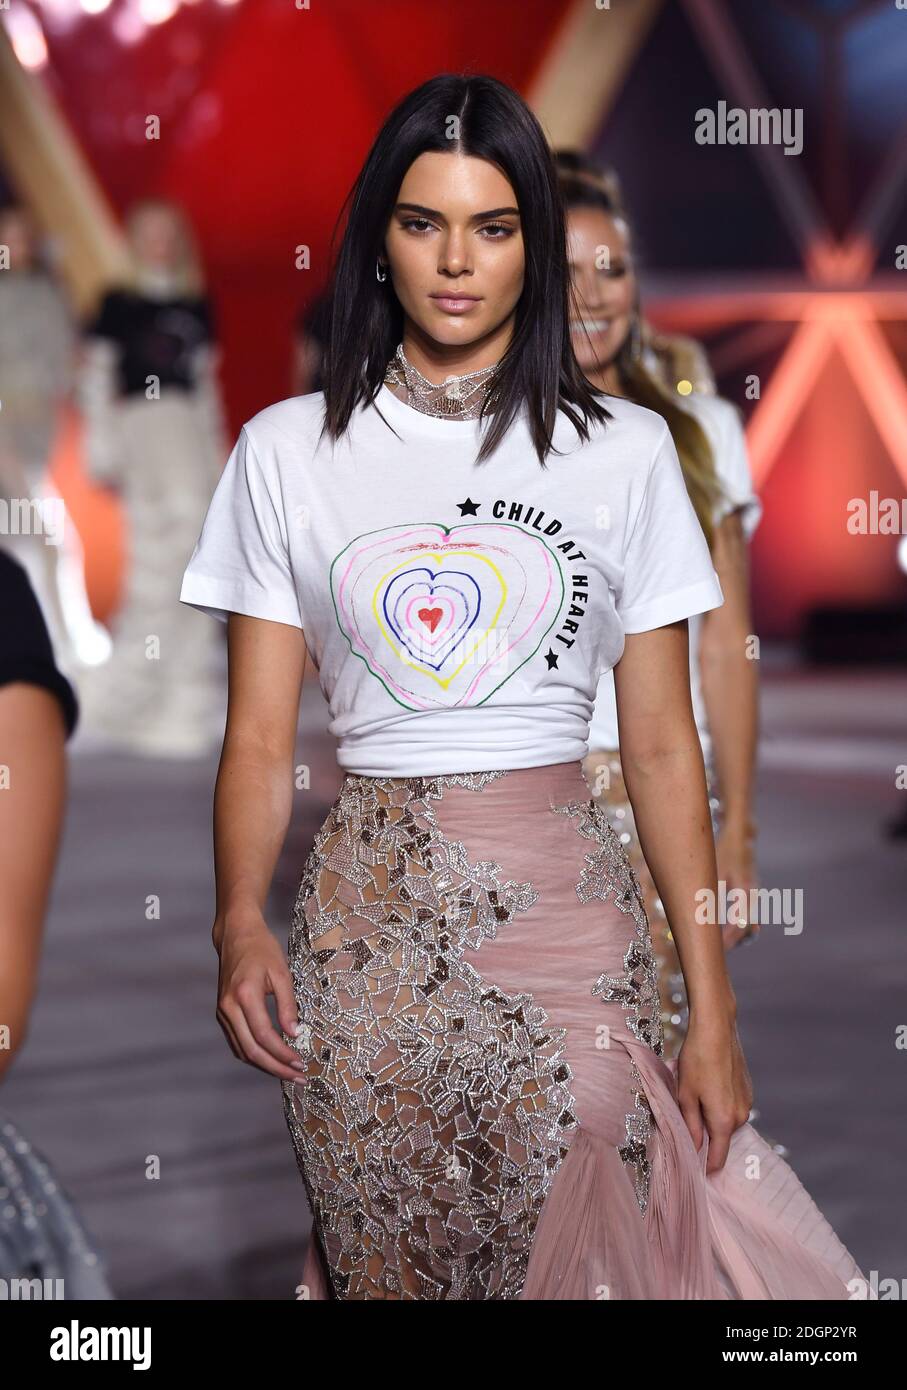 Kendall Jenner on the catwalk at the Fashion For Relief Charity Fashion Show part of the Cannes Film Festival. Photo credit should read: Doug Peters/EMPICS Entertainment Stock Photo - Alamy